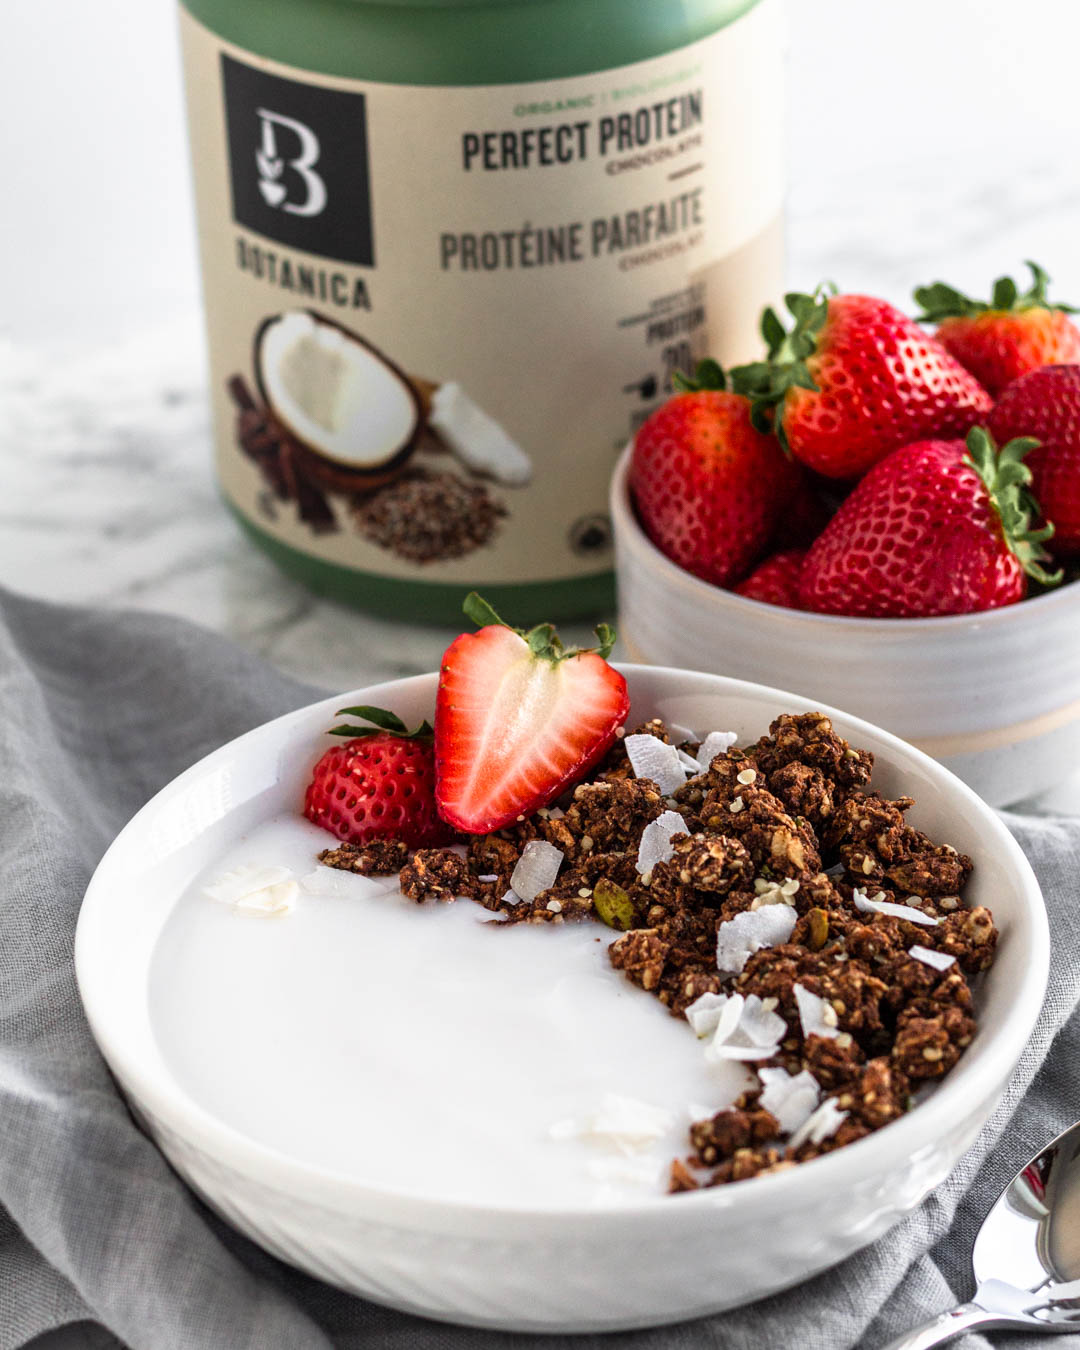 Protein packed chocolate granola recipe using Botanica health perfect protein chocolate protein powder. vegan and gluten free made with real food ingredients. Healthy breakfast. granola and yogurt.